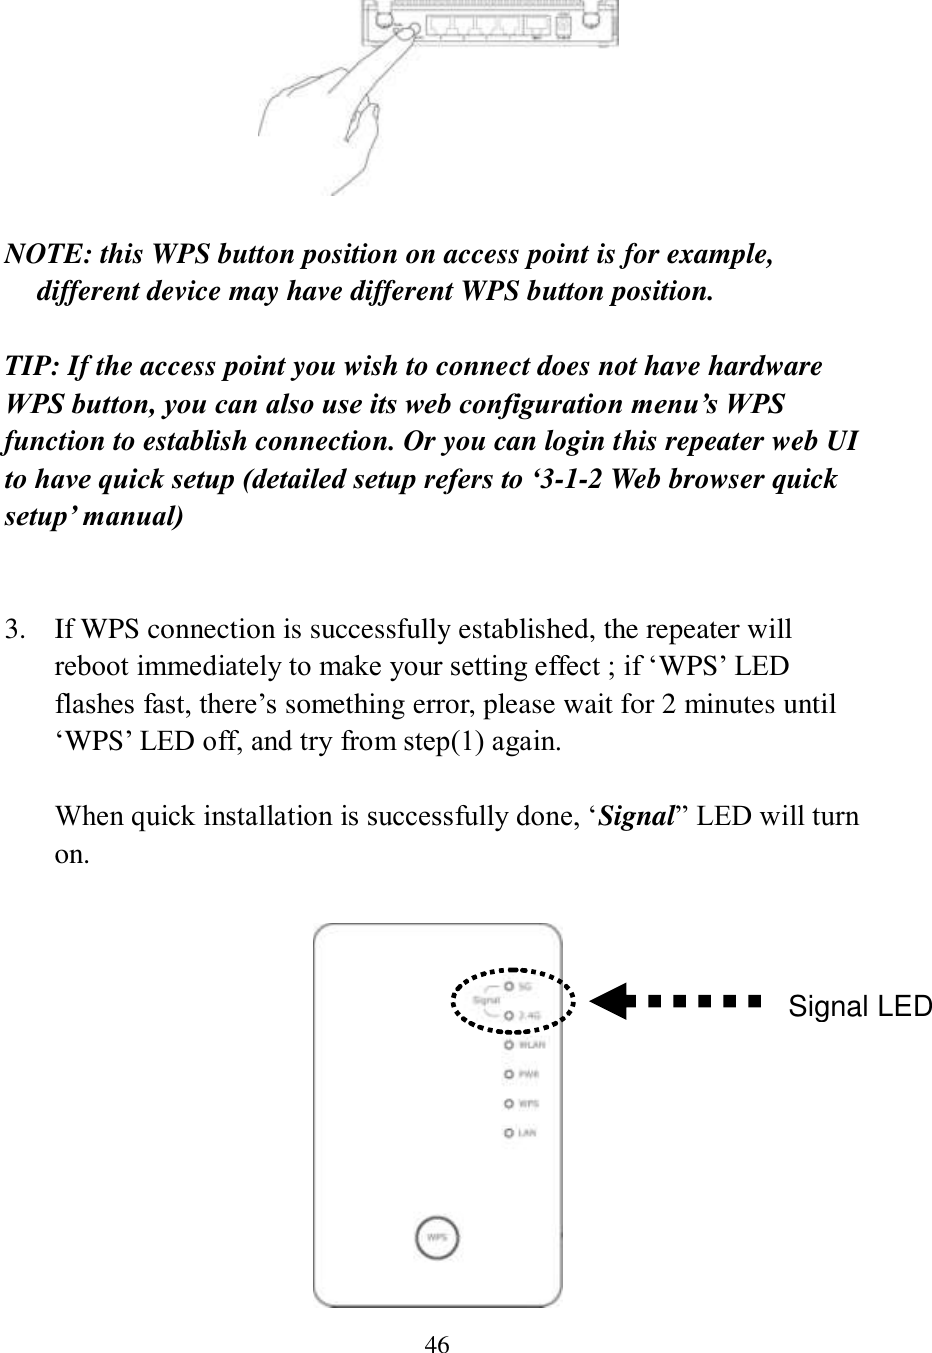 46   NOTE: this WPS button position on access point is for example, different device may have different WPS button position.  TIP: If the access point you wish to connect does not have hardware WPS button, you can also use its web configuration menu’s WPS function to establish connection. Or you can login this repeater web UI to have quick setup (detailed setup refers to ‘3-1-2 Web browser quick setup’ manual)   3. If WPS connection is successfully established, the repeater will reboot immediately to make your setting effect ; if ‘WPS’ LED flashes fast, there’s something error, please wait for 2 minutes until ‘WPS’ LED off, and try from step(1) again.  When quick installation is successfully done, ‘Signal” LED will turn on.   Signal LED 